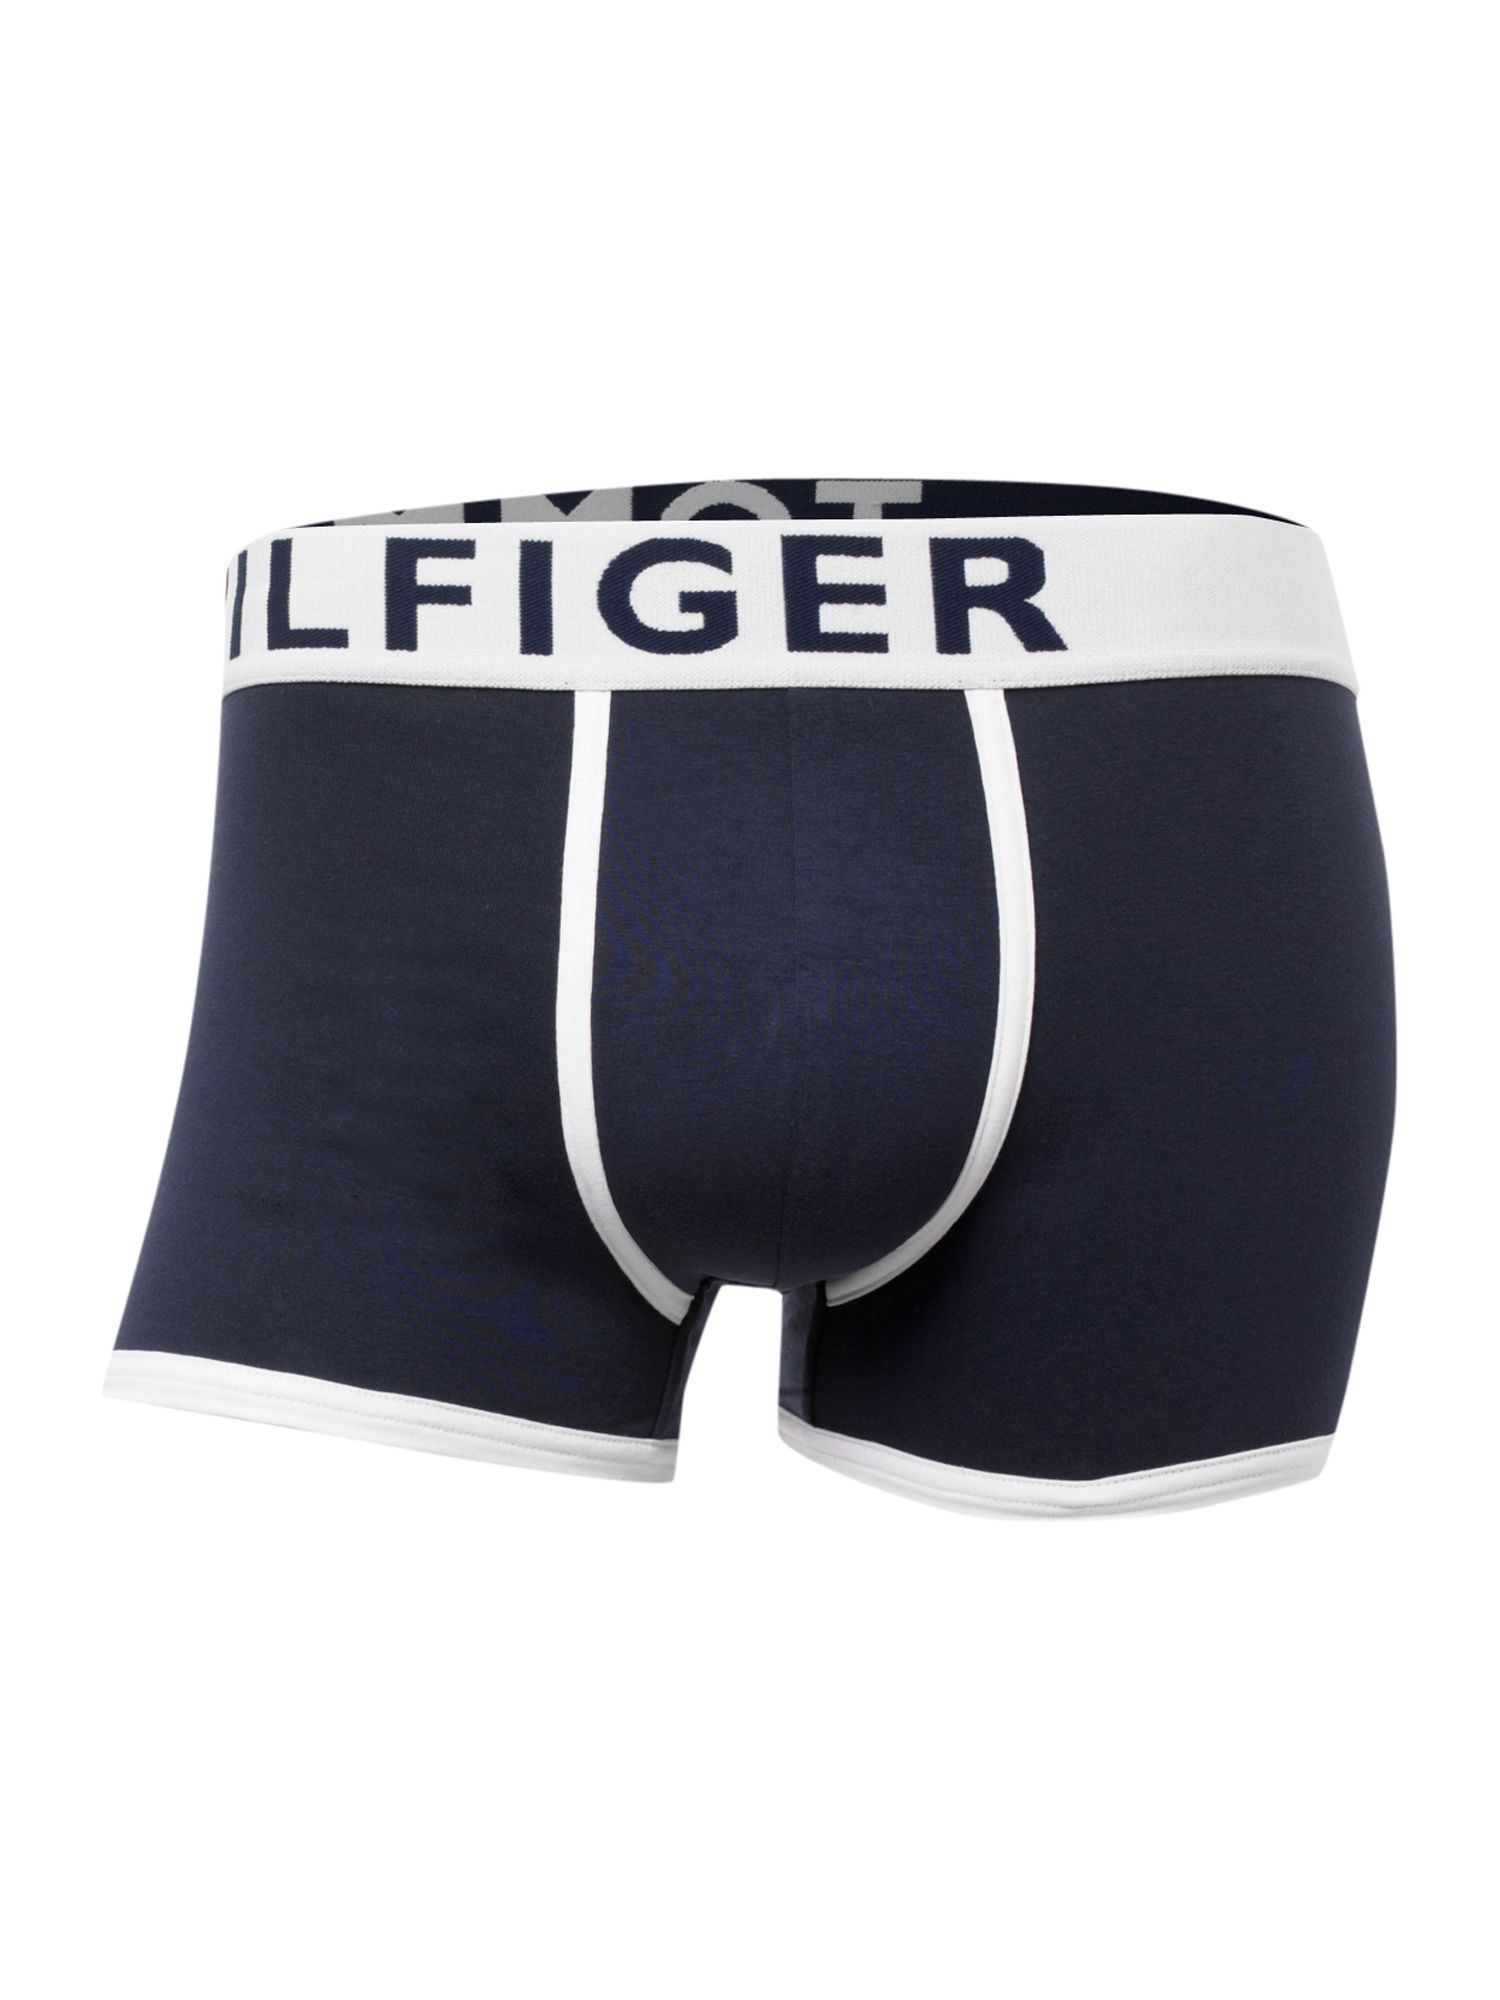 Men’s Underwear, It’s Your Personal Choice!